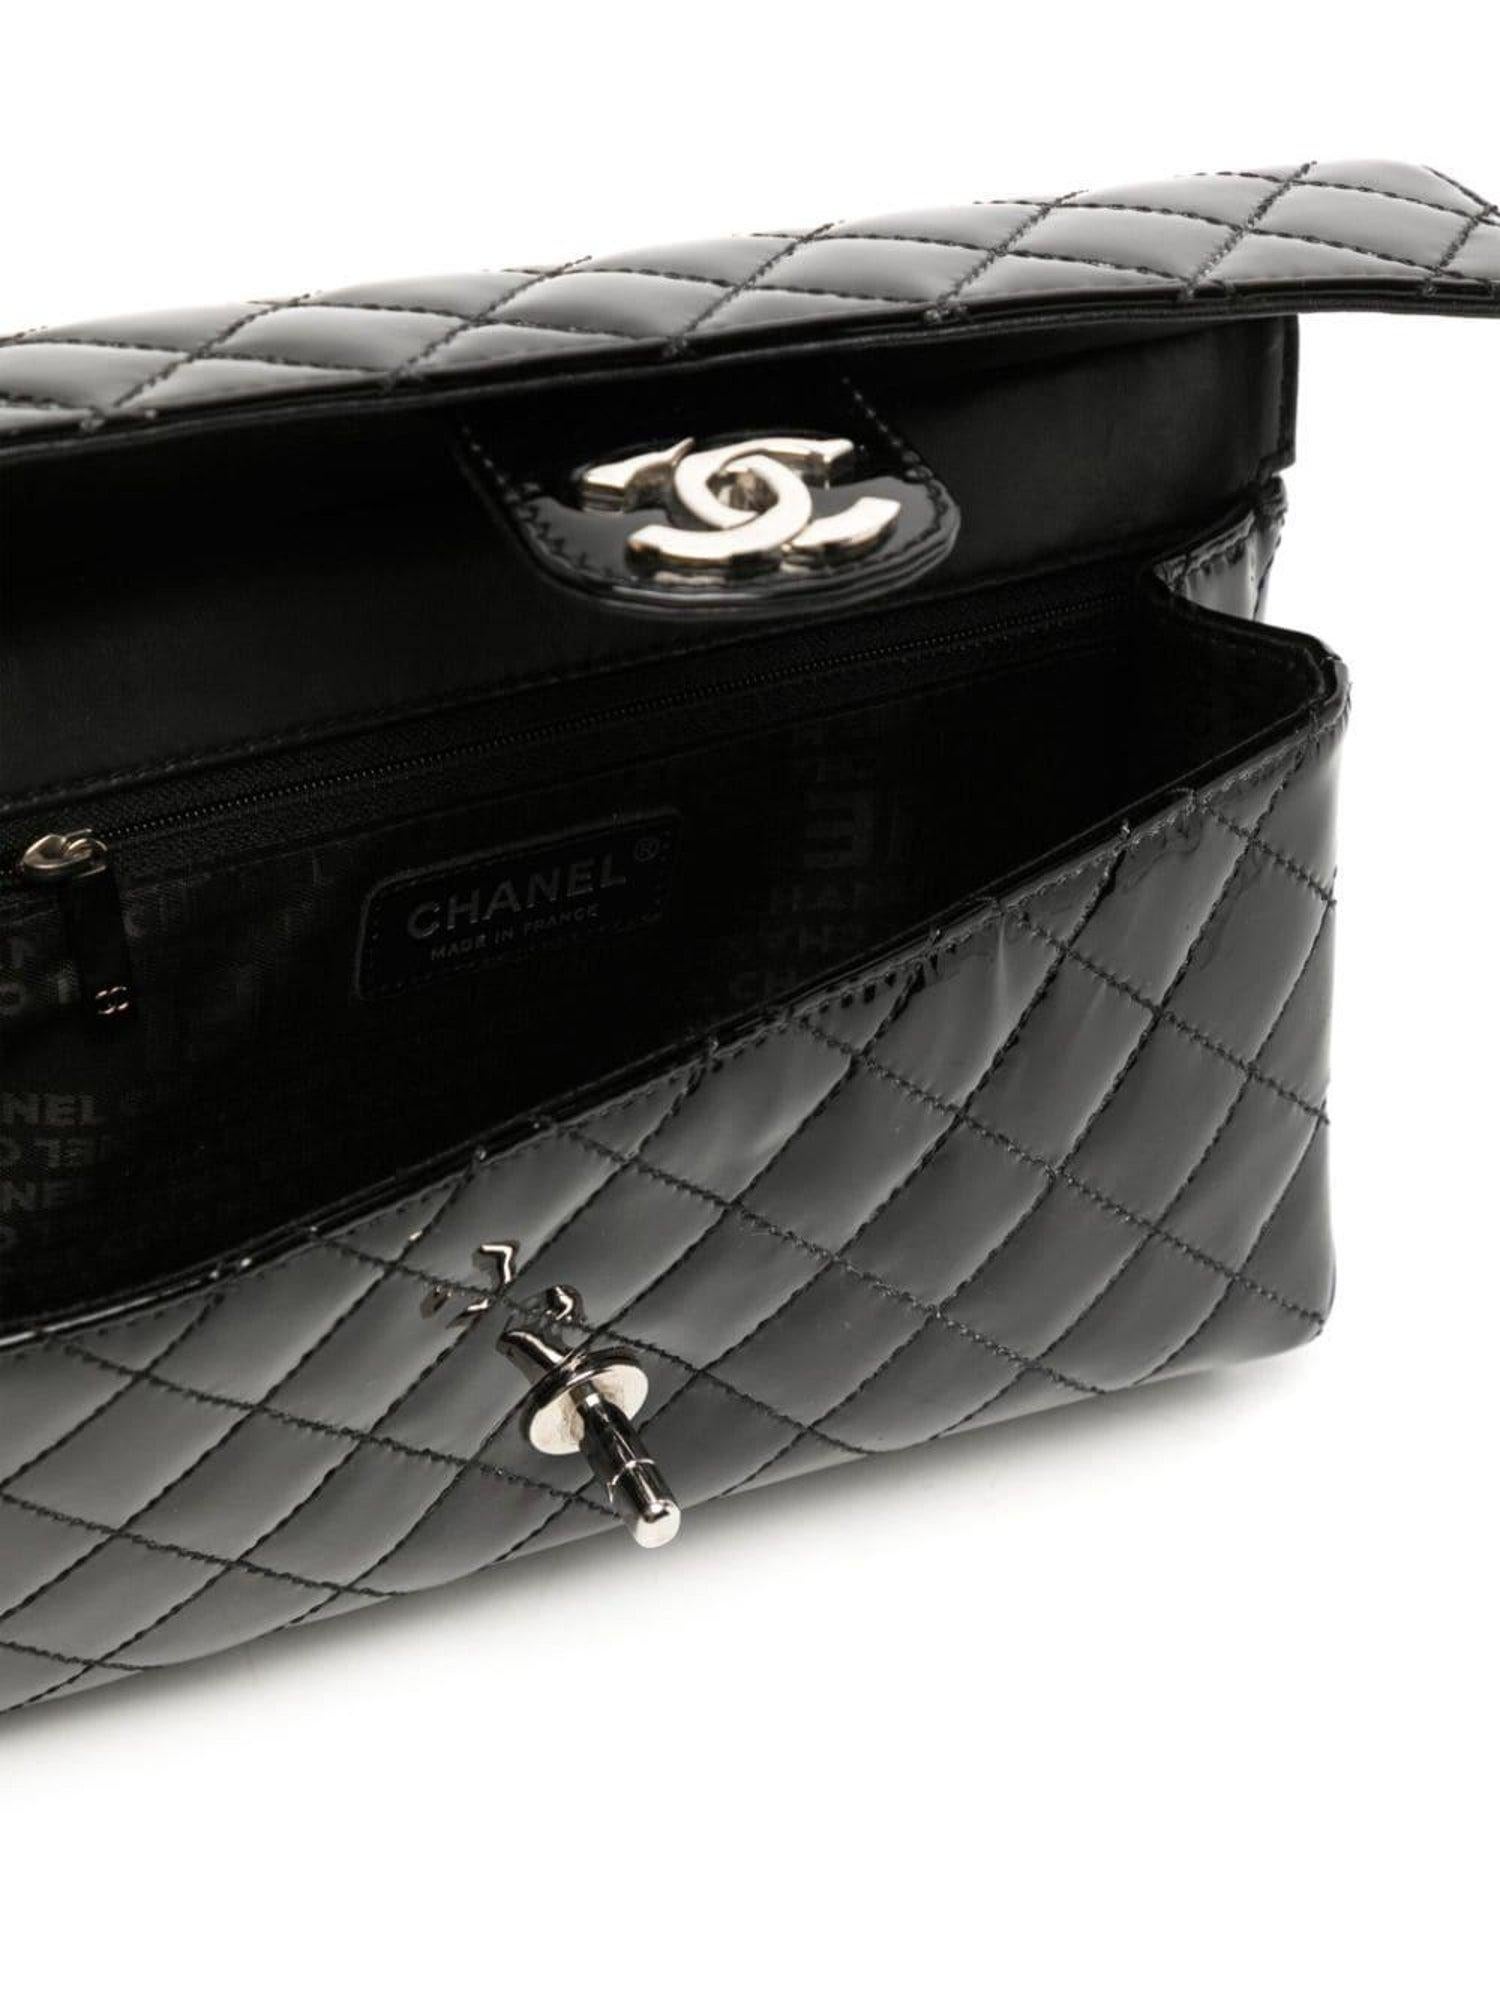 Chanel Classic Flap Supermodel Super Rare Quilted Black Patent Leather Bag For Sale 7